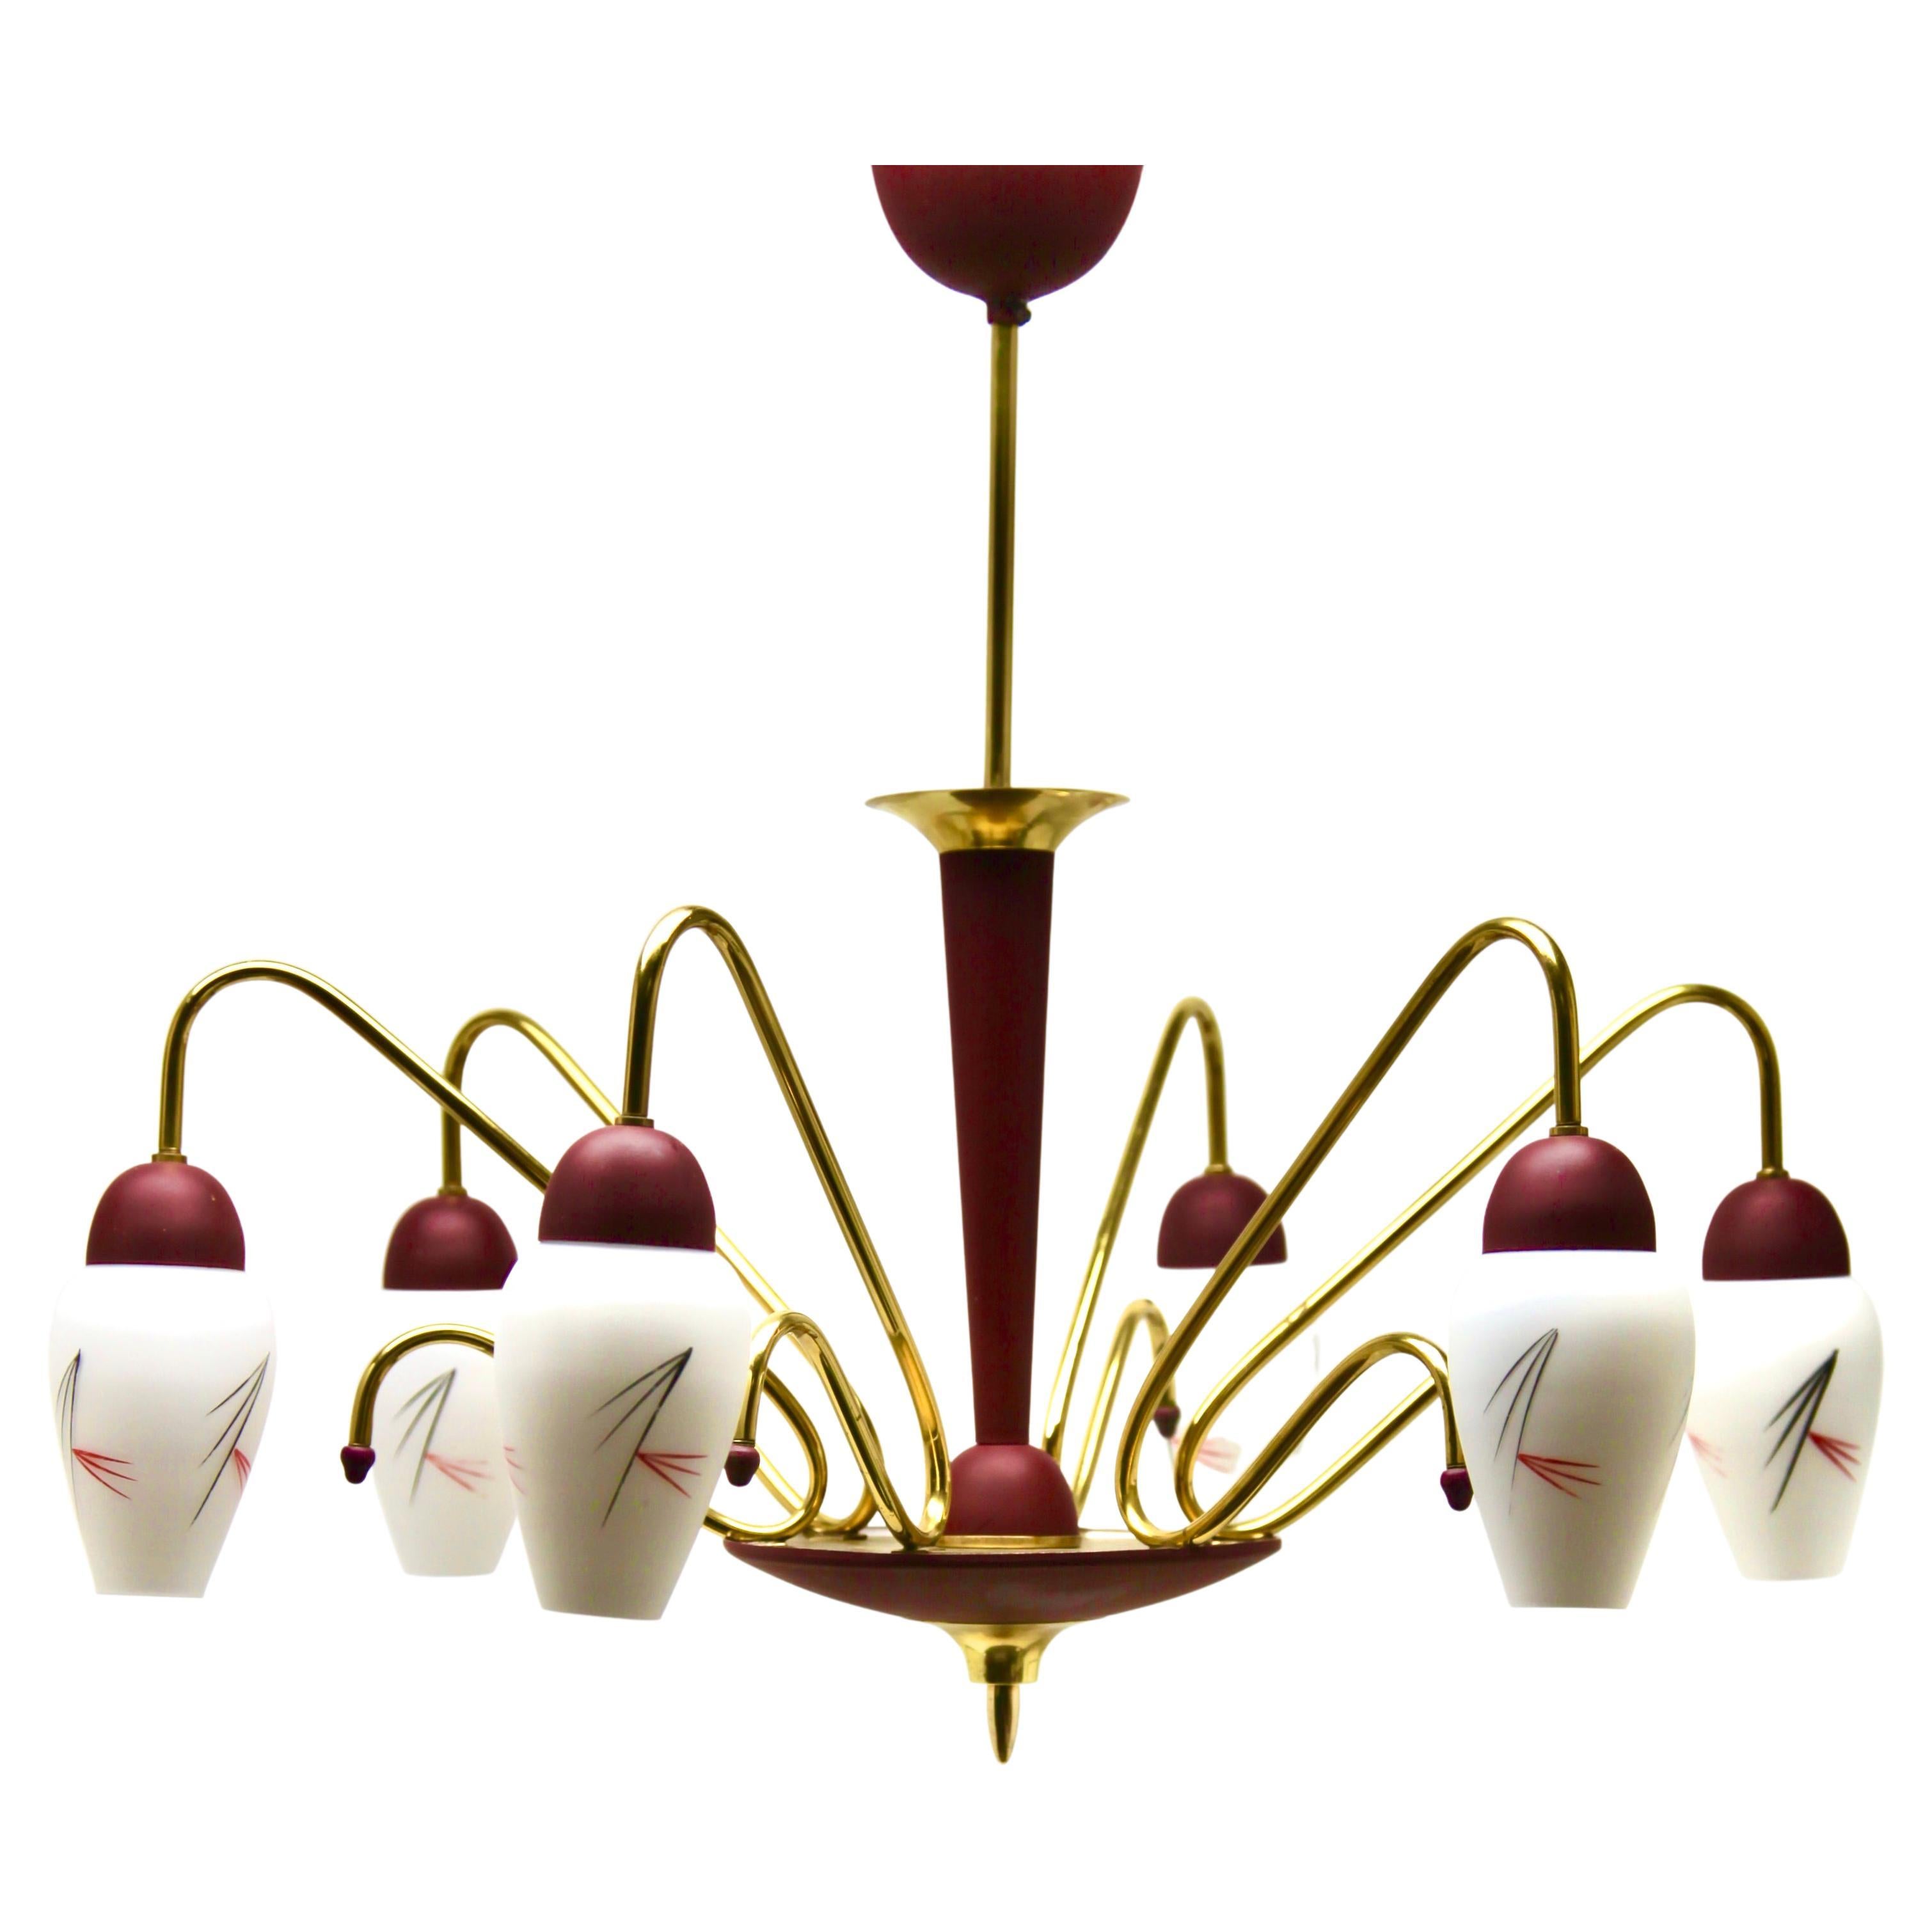 Vintage Chandelier Six Arms in the Style of Stilnovo, Italian, 1960s For Sale